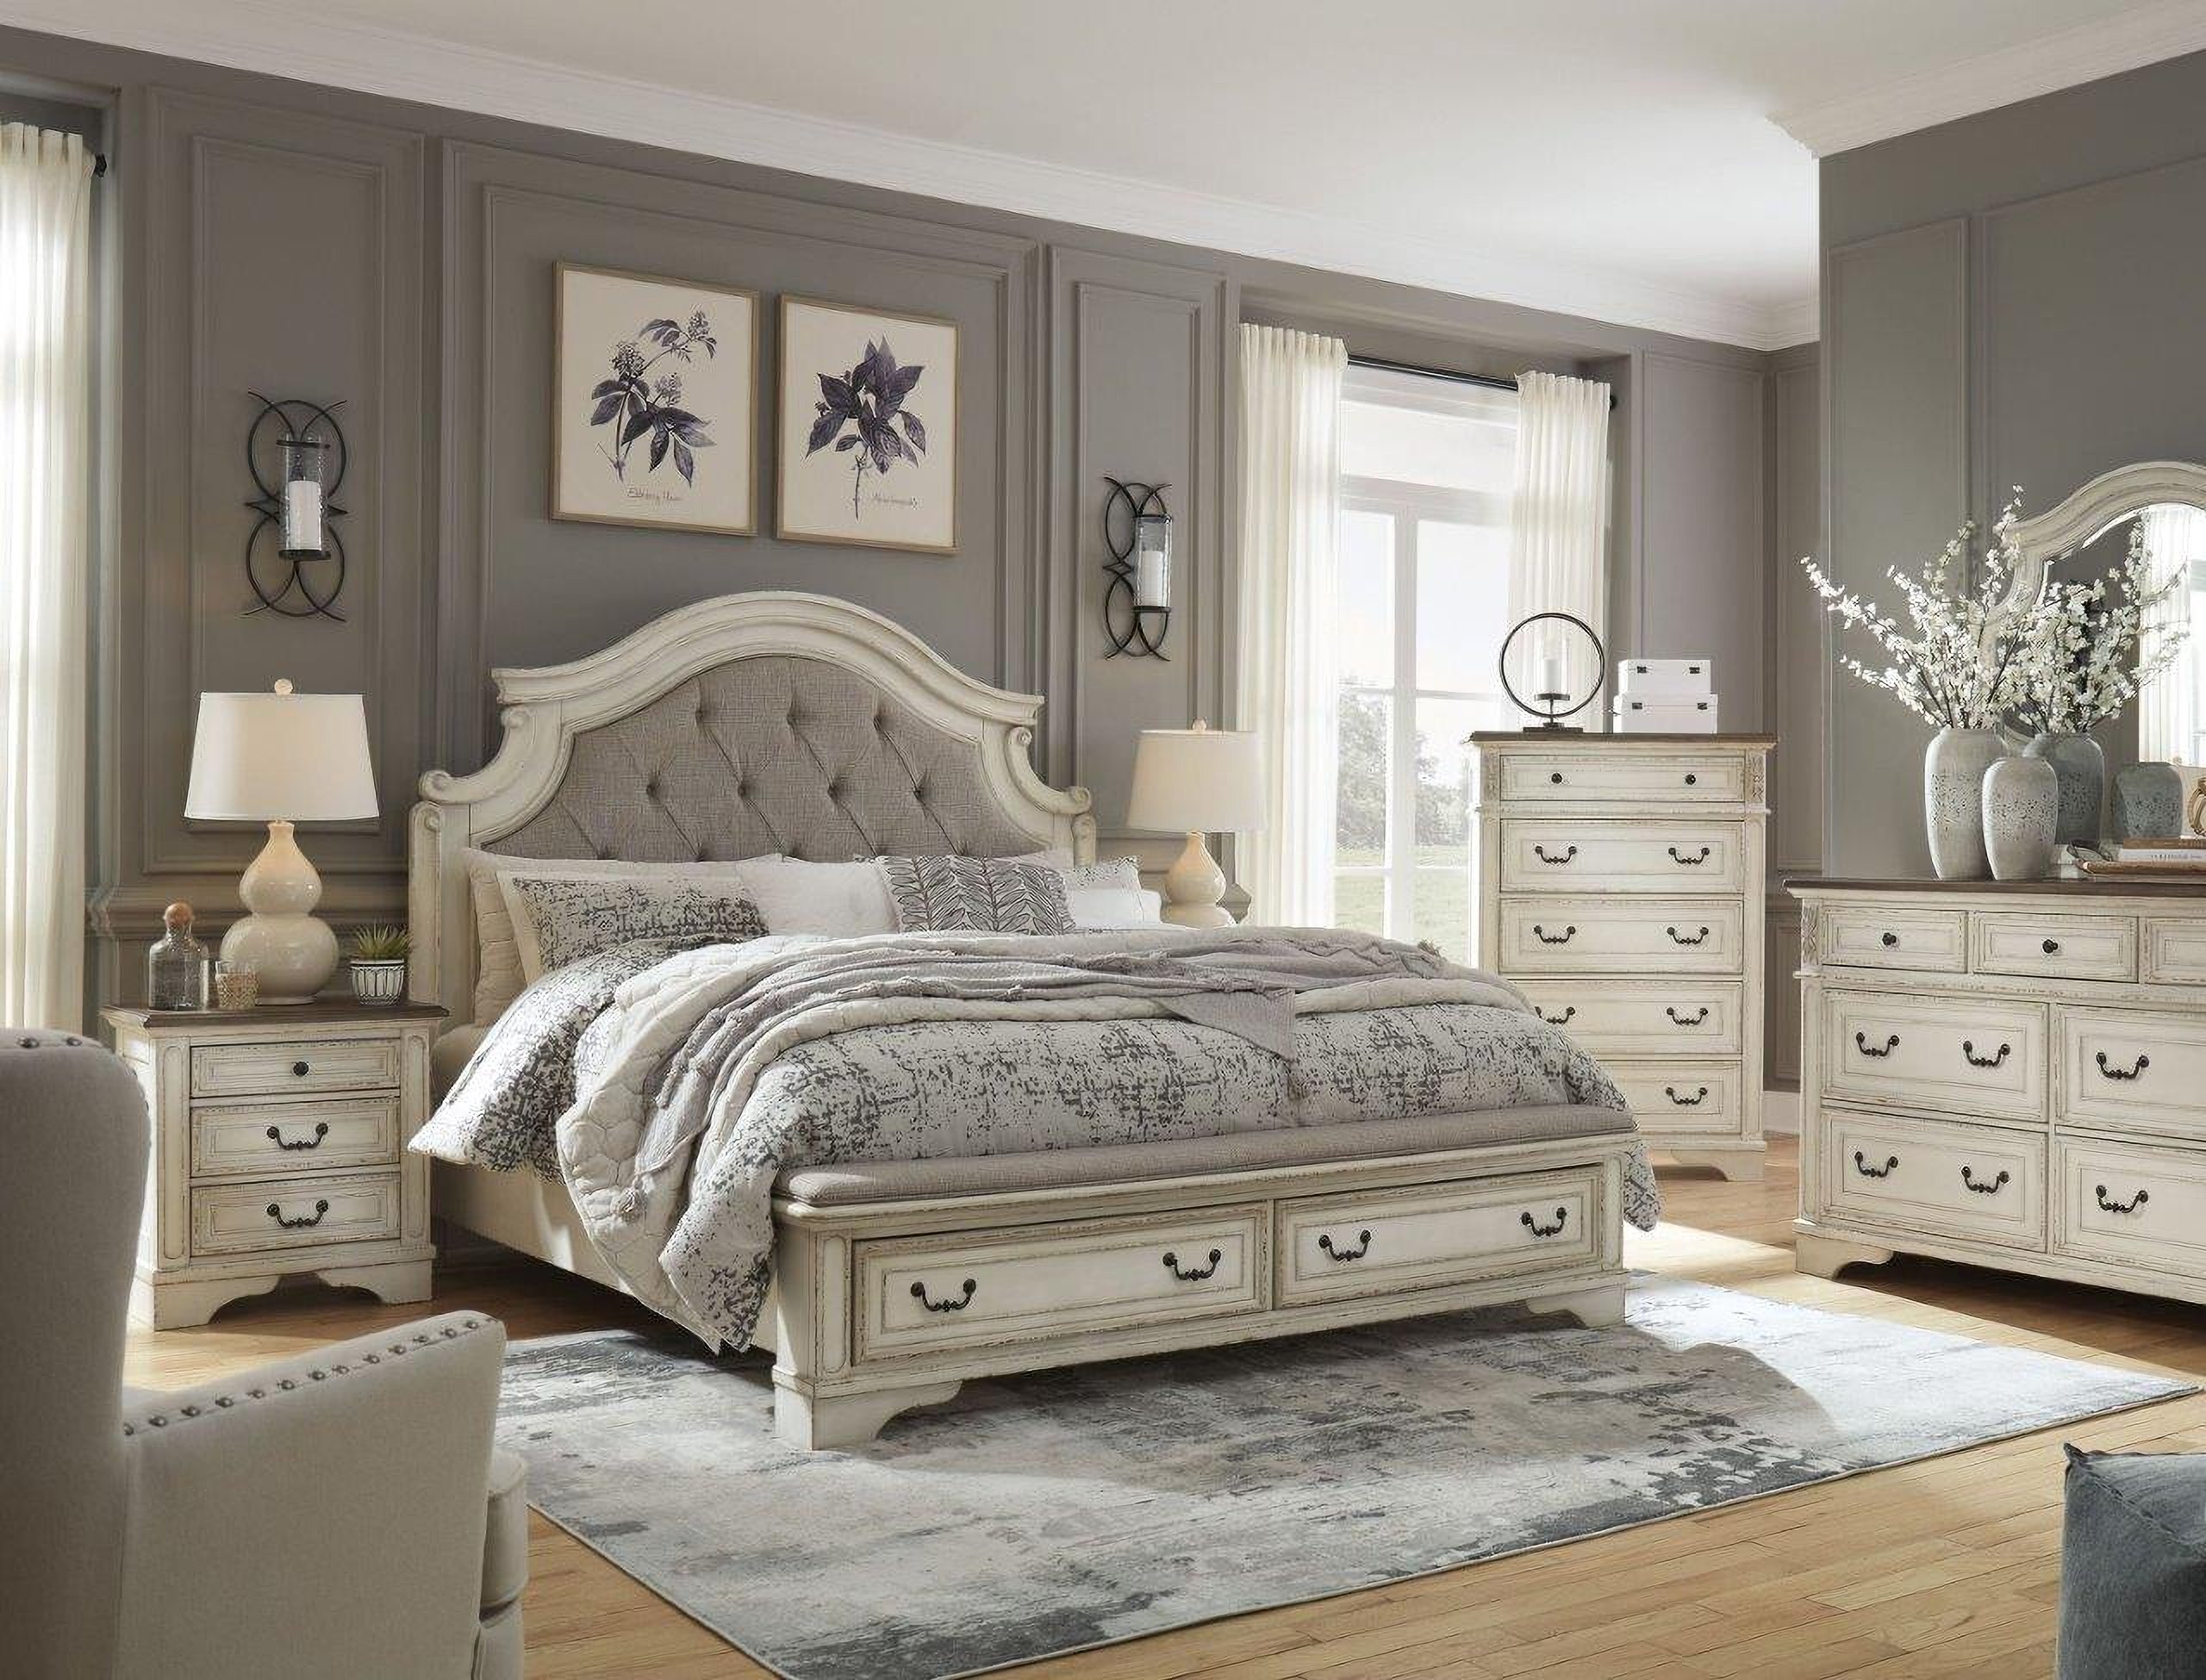 https://cdn.1stopbedrooms.com/media/i/raw/catalog/product/r/e/realyn-chipped-white-upholstered-panel-bedroom-set-with-bench-footboard_qb13292807.jpg